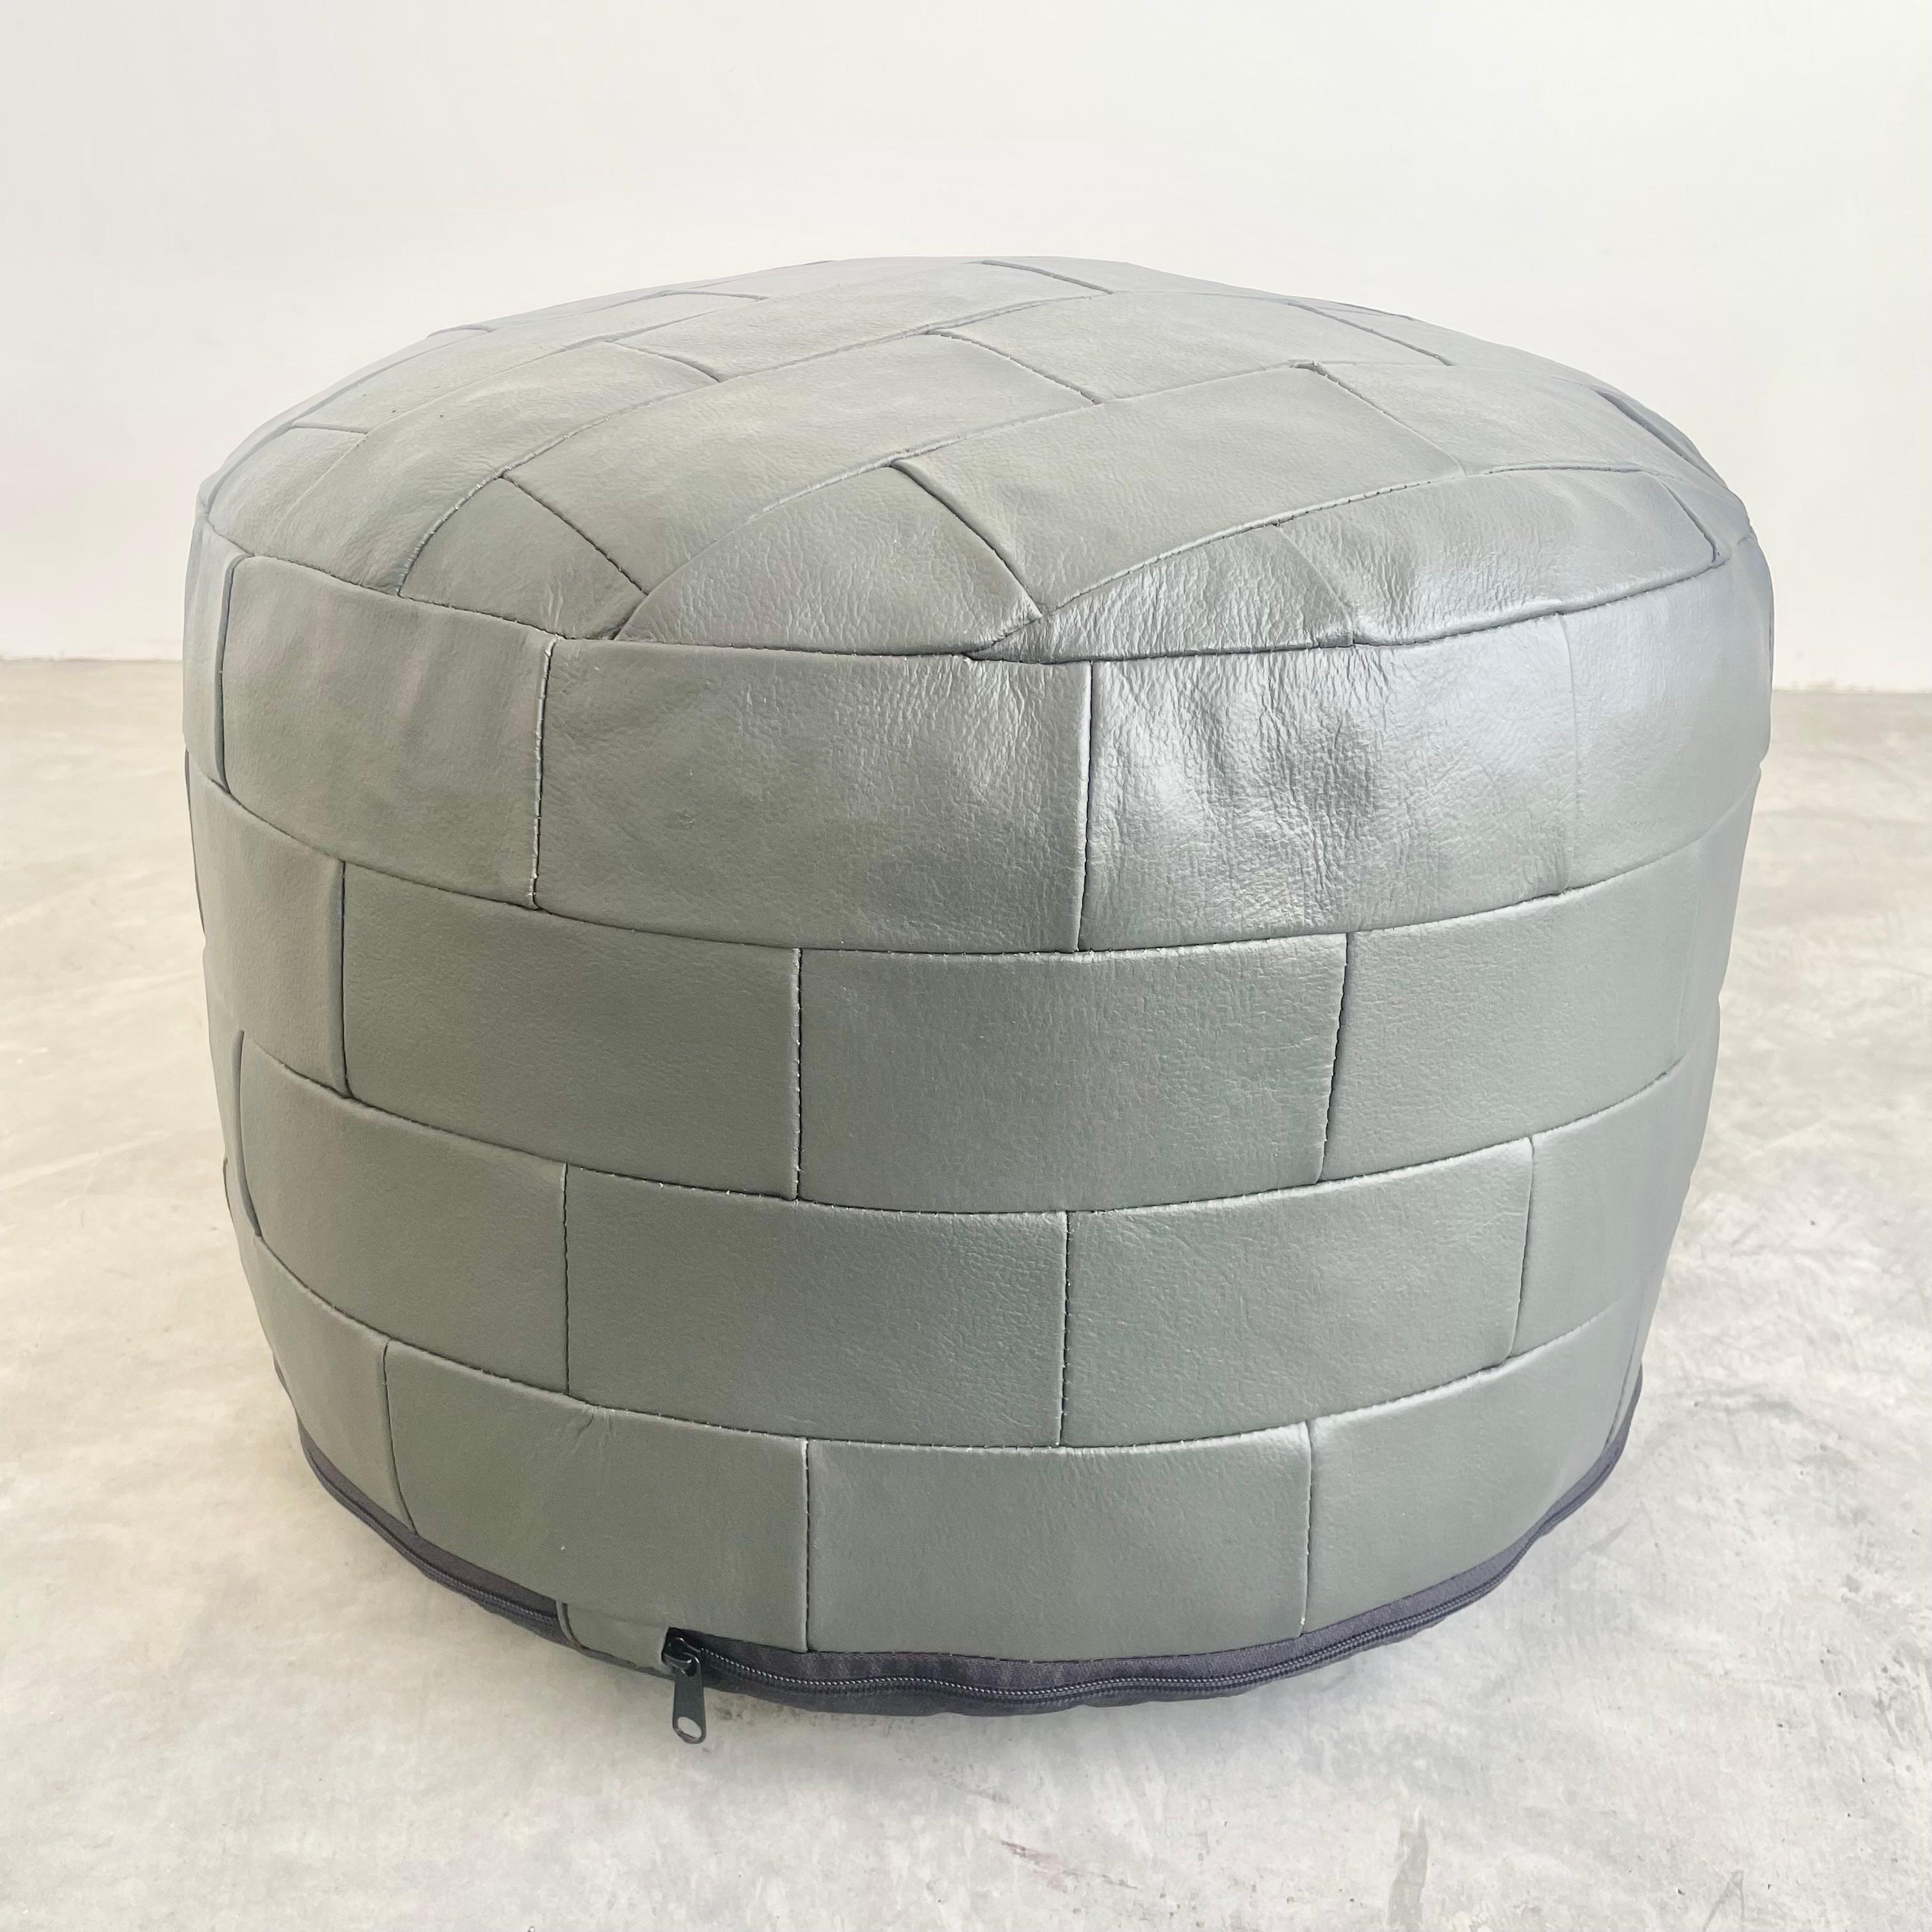 Gorgeous grey colored leather pouf by Swiss designer De Sede with square patchwork. Perfect accent piece. Good vintage condition with new rubberized bottom.

